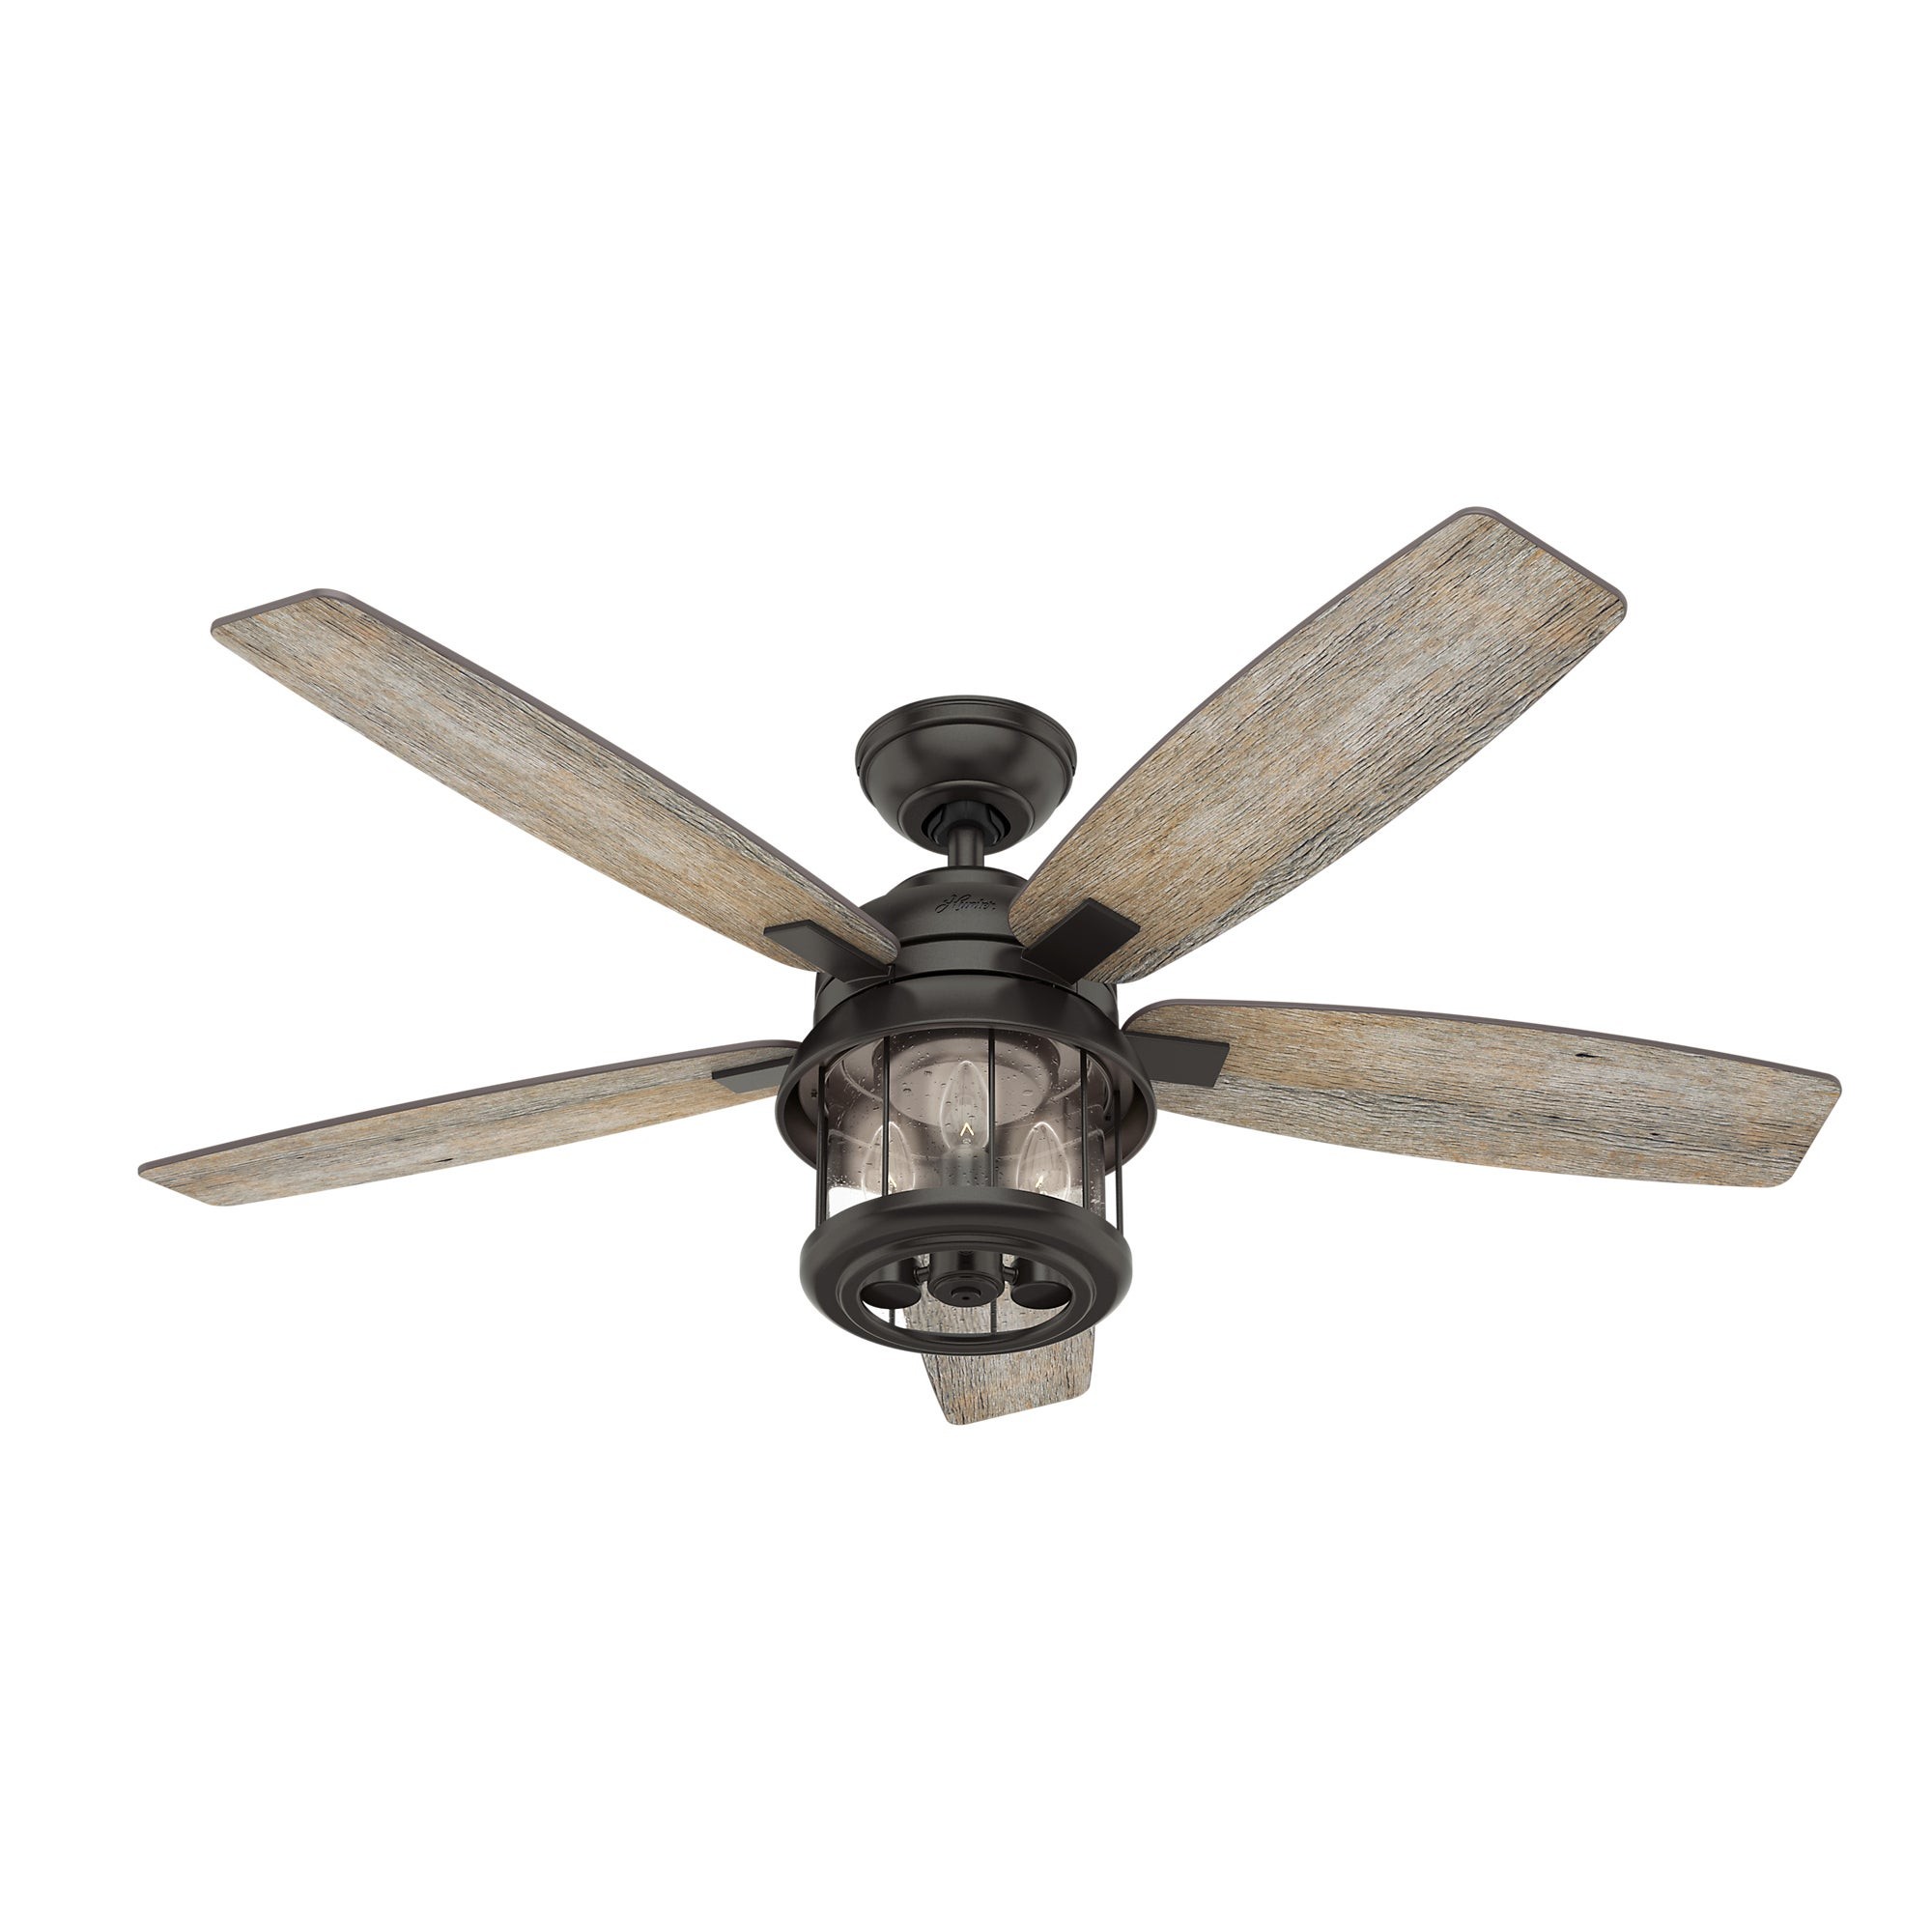 Coral Bay 52" Indoor/Outdoor Ceiling Fan w/ Light Kit